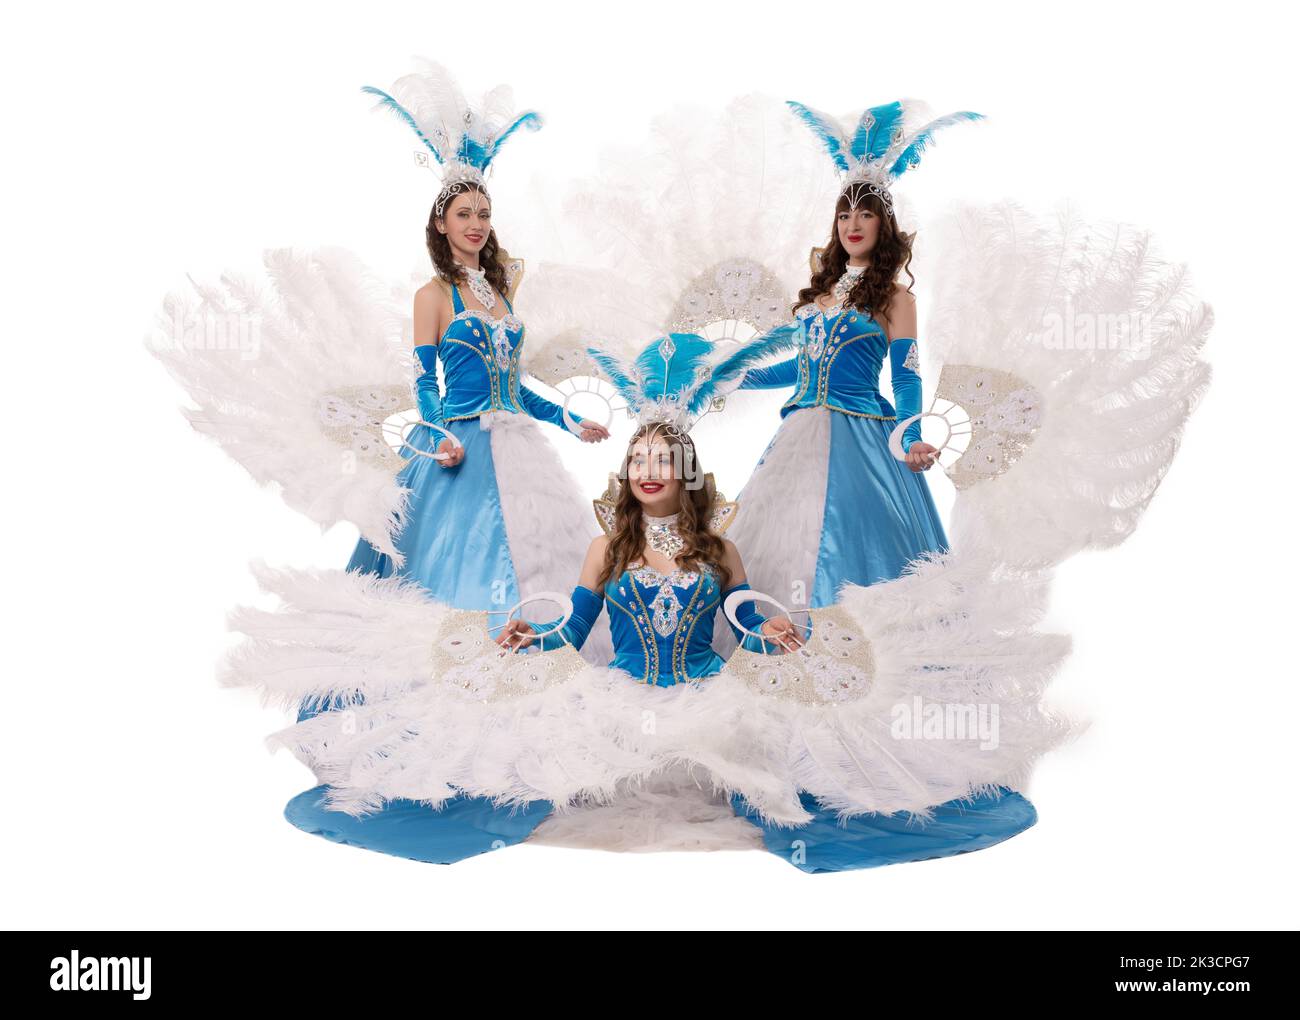 Pretty ballete trio woman in dance dresses with feather fans Stock Photo